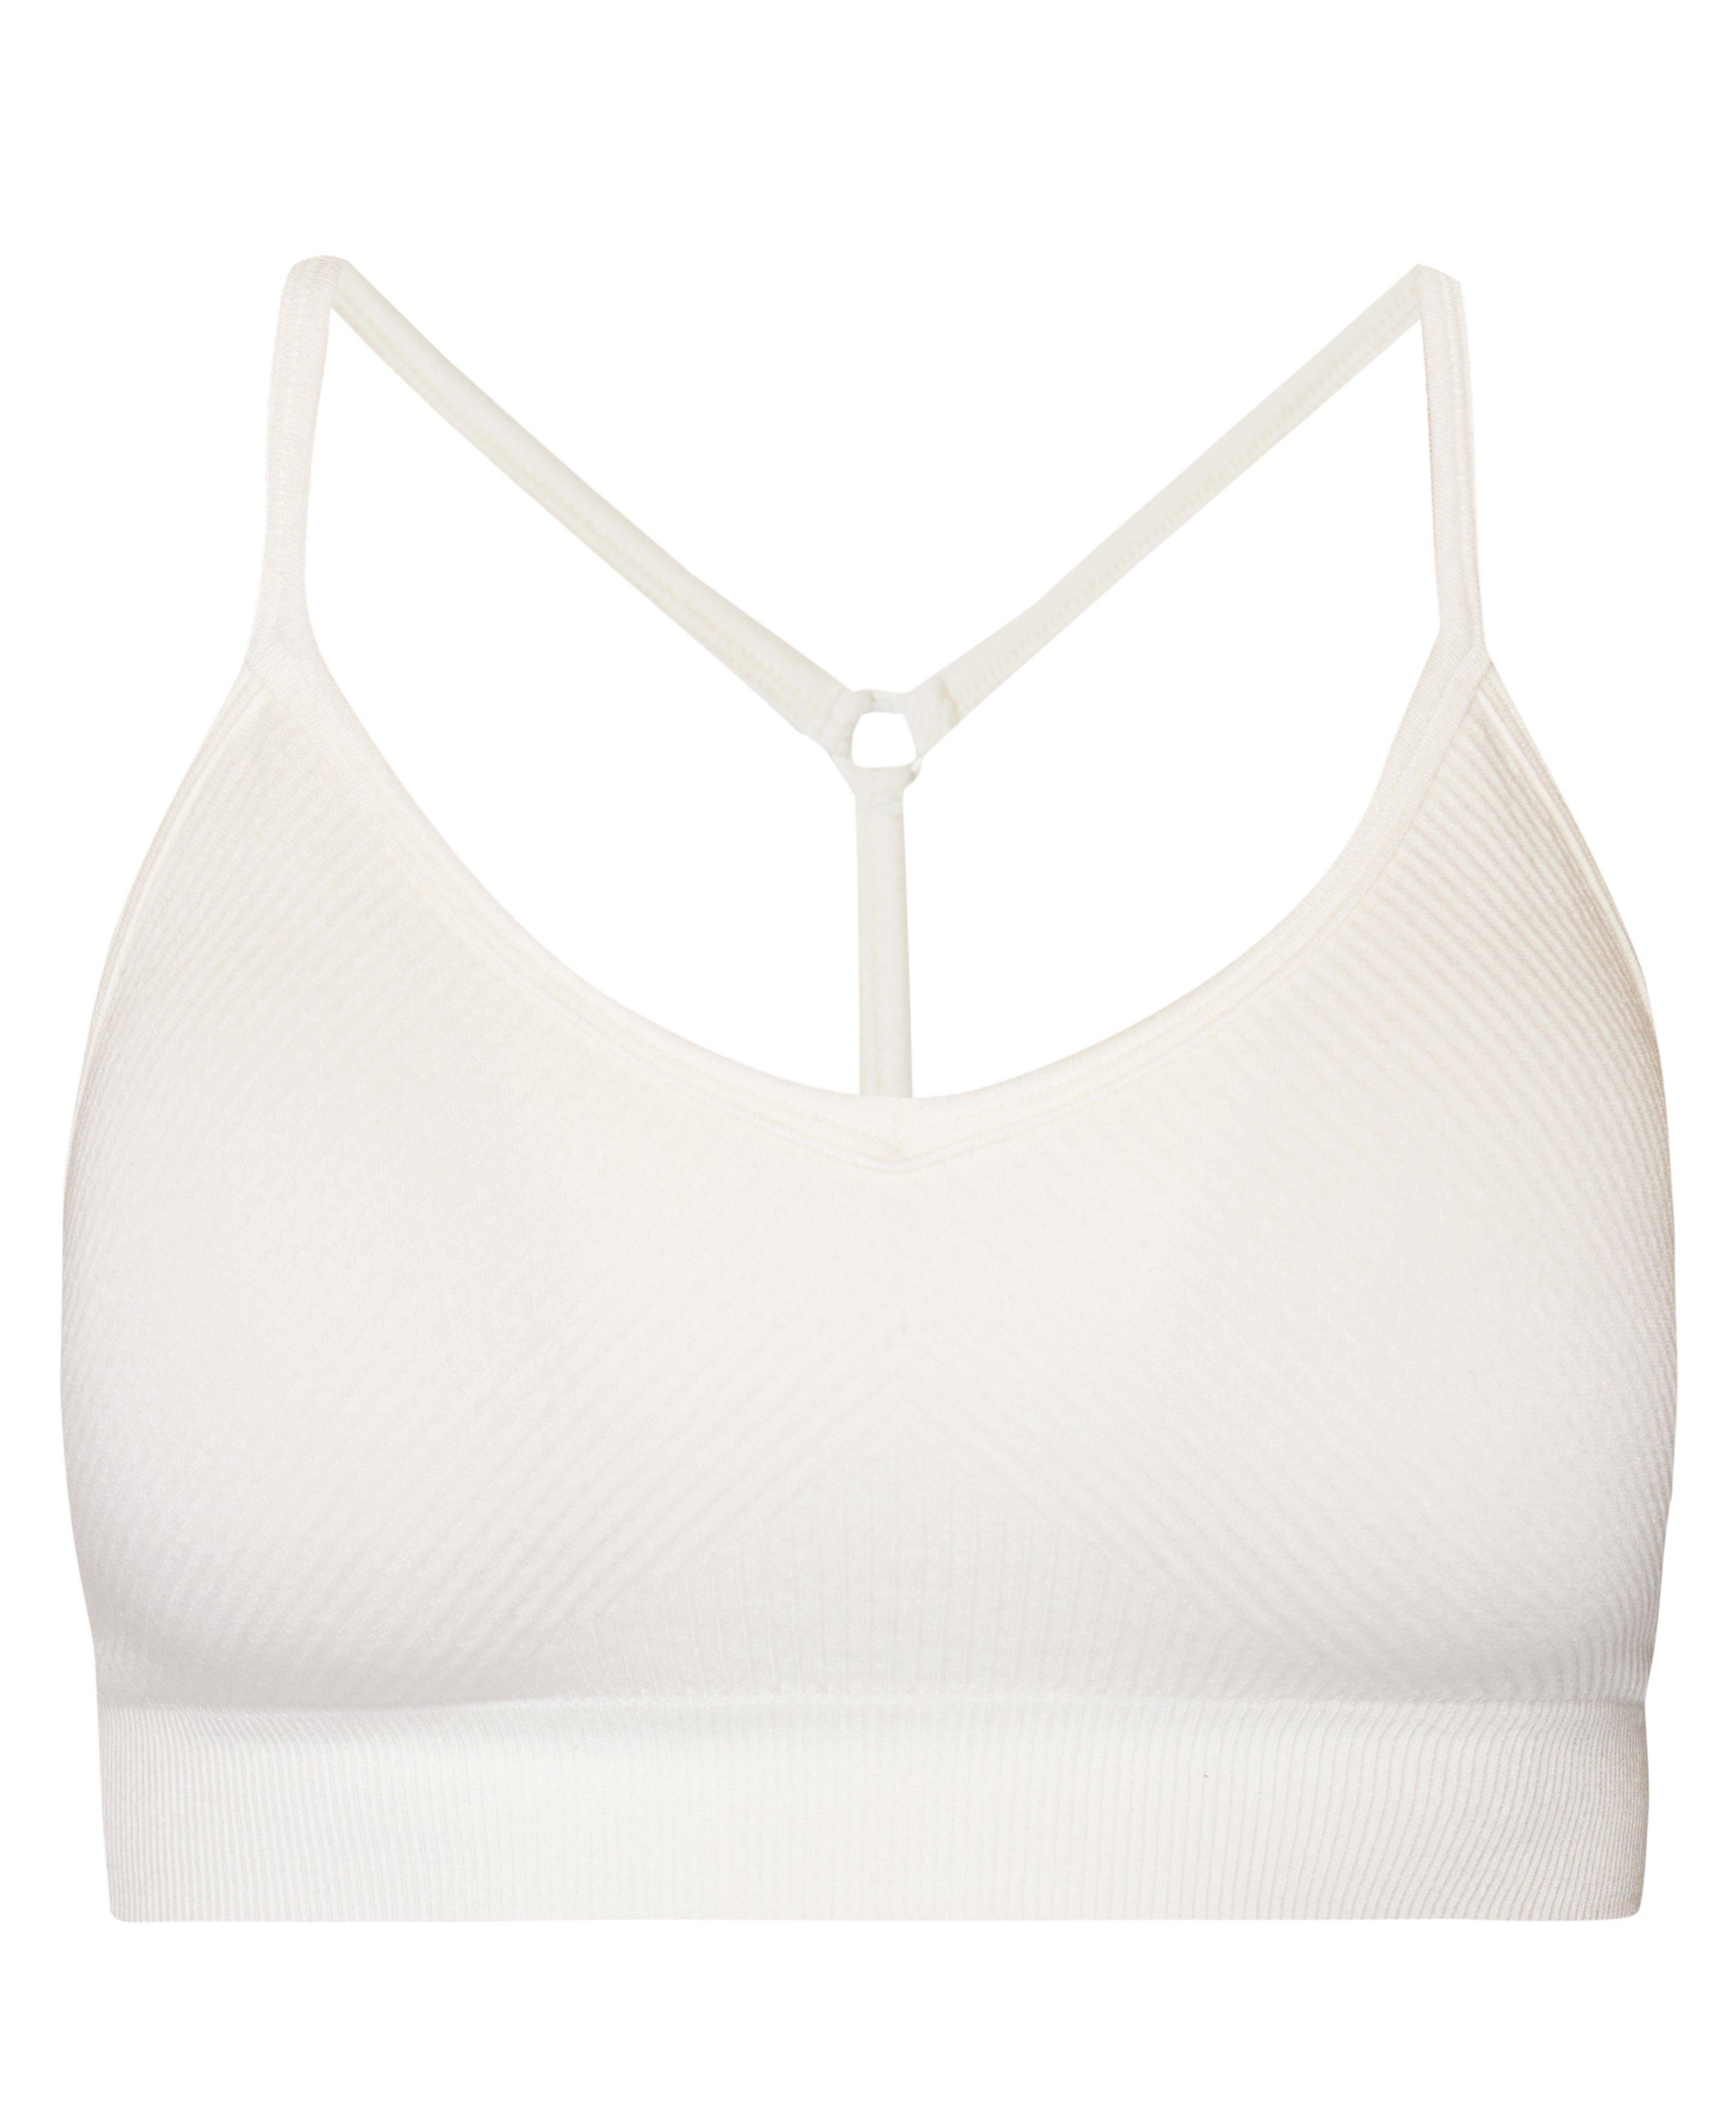 Womens New Lilybod Annabell Sports Bra Size XS Workout Top White